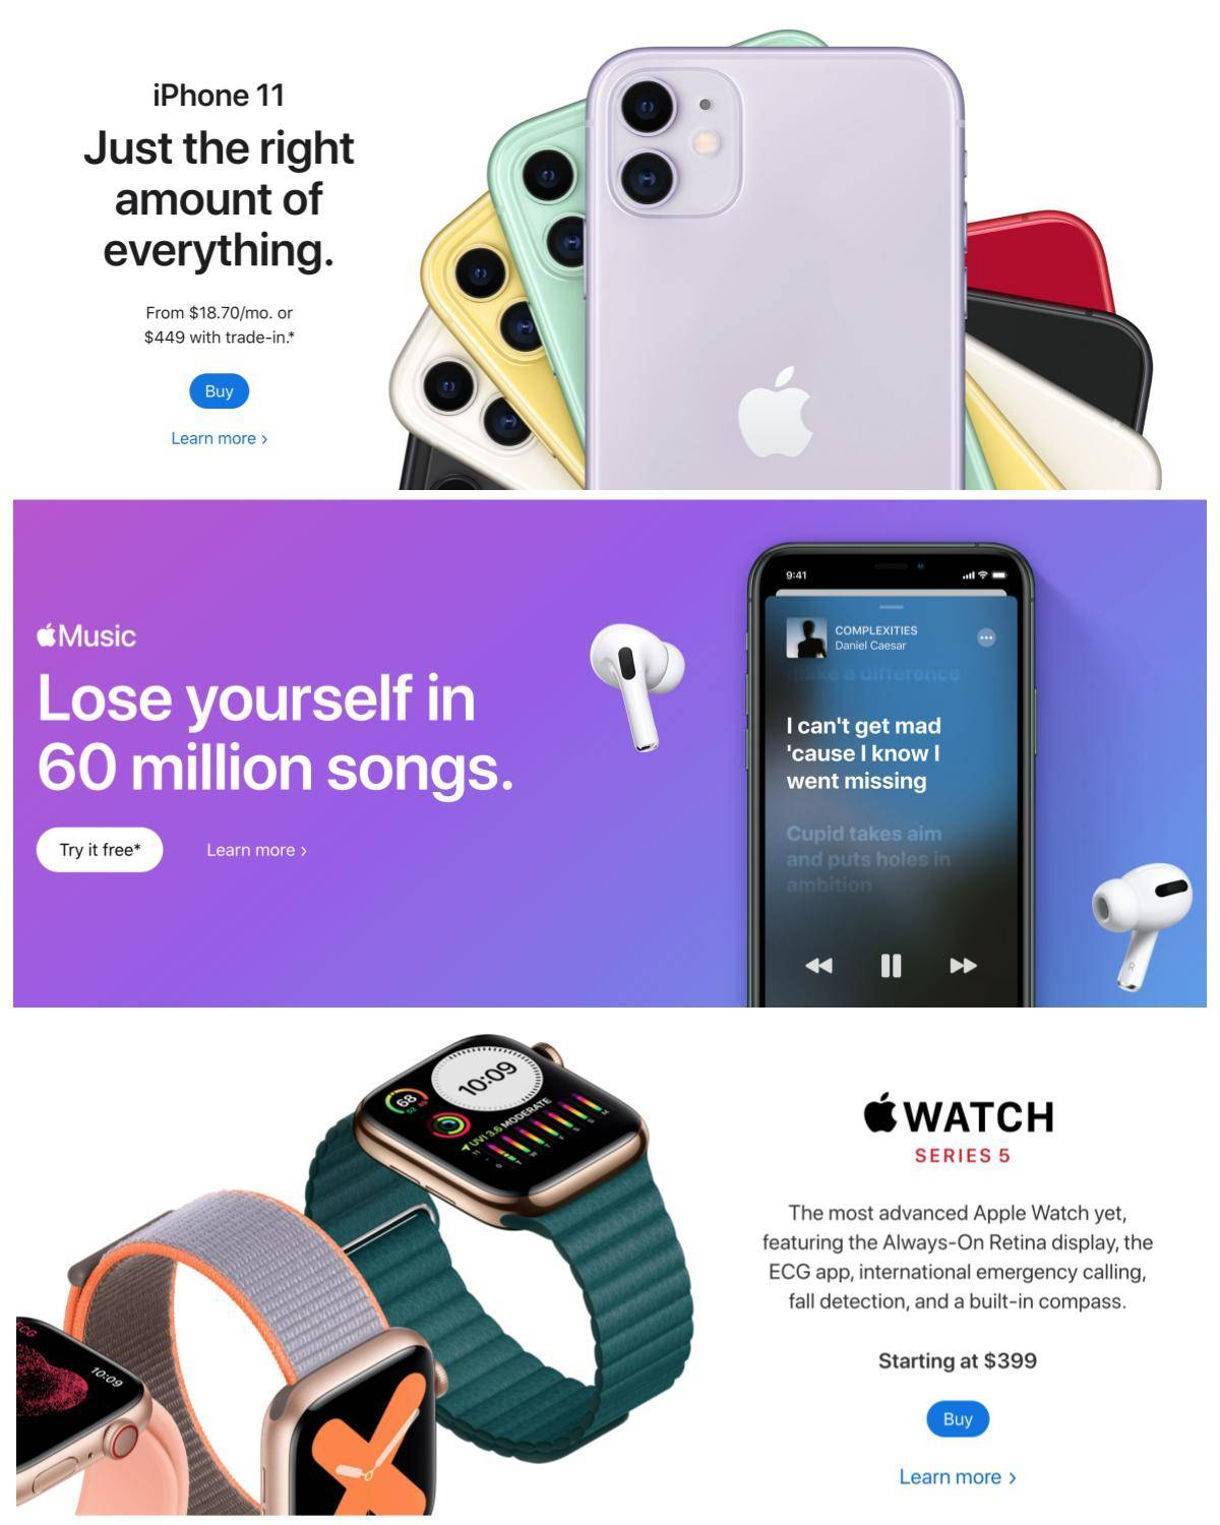 examples of the Apple website's brand design continuity across multiple products and pages